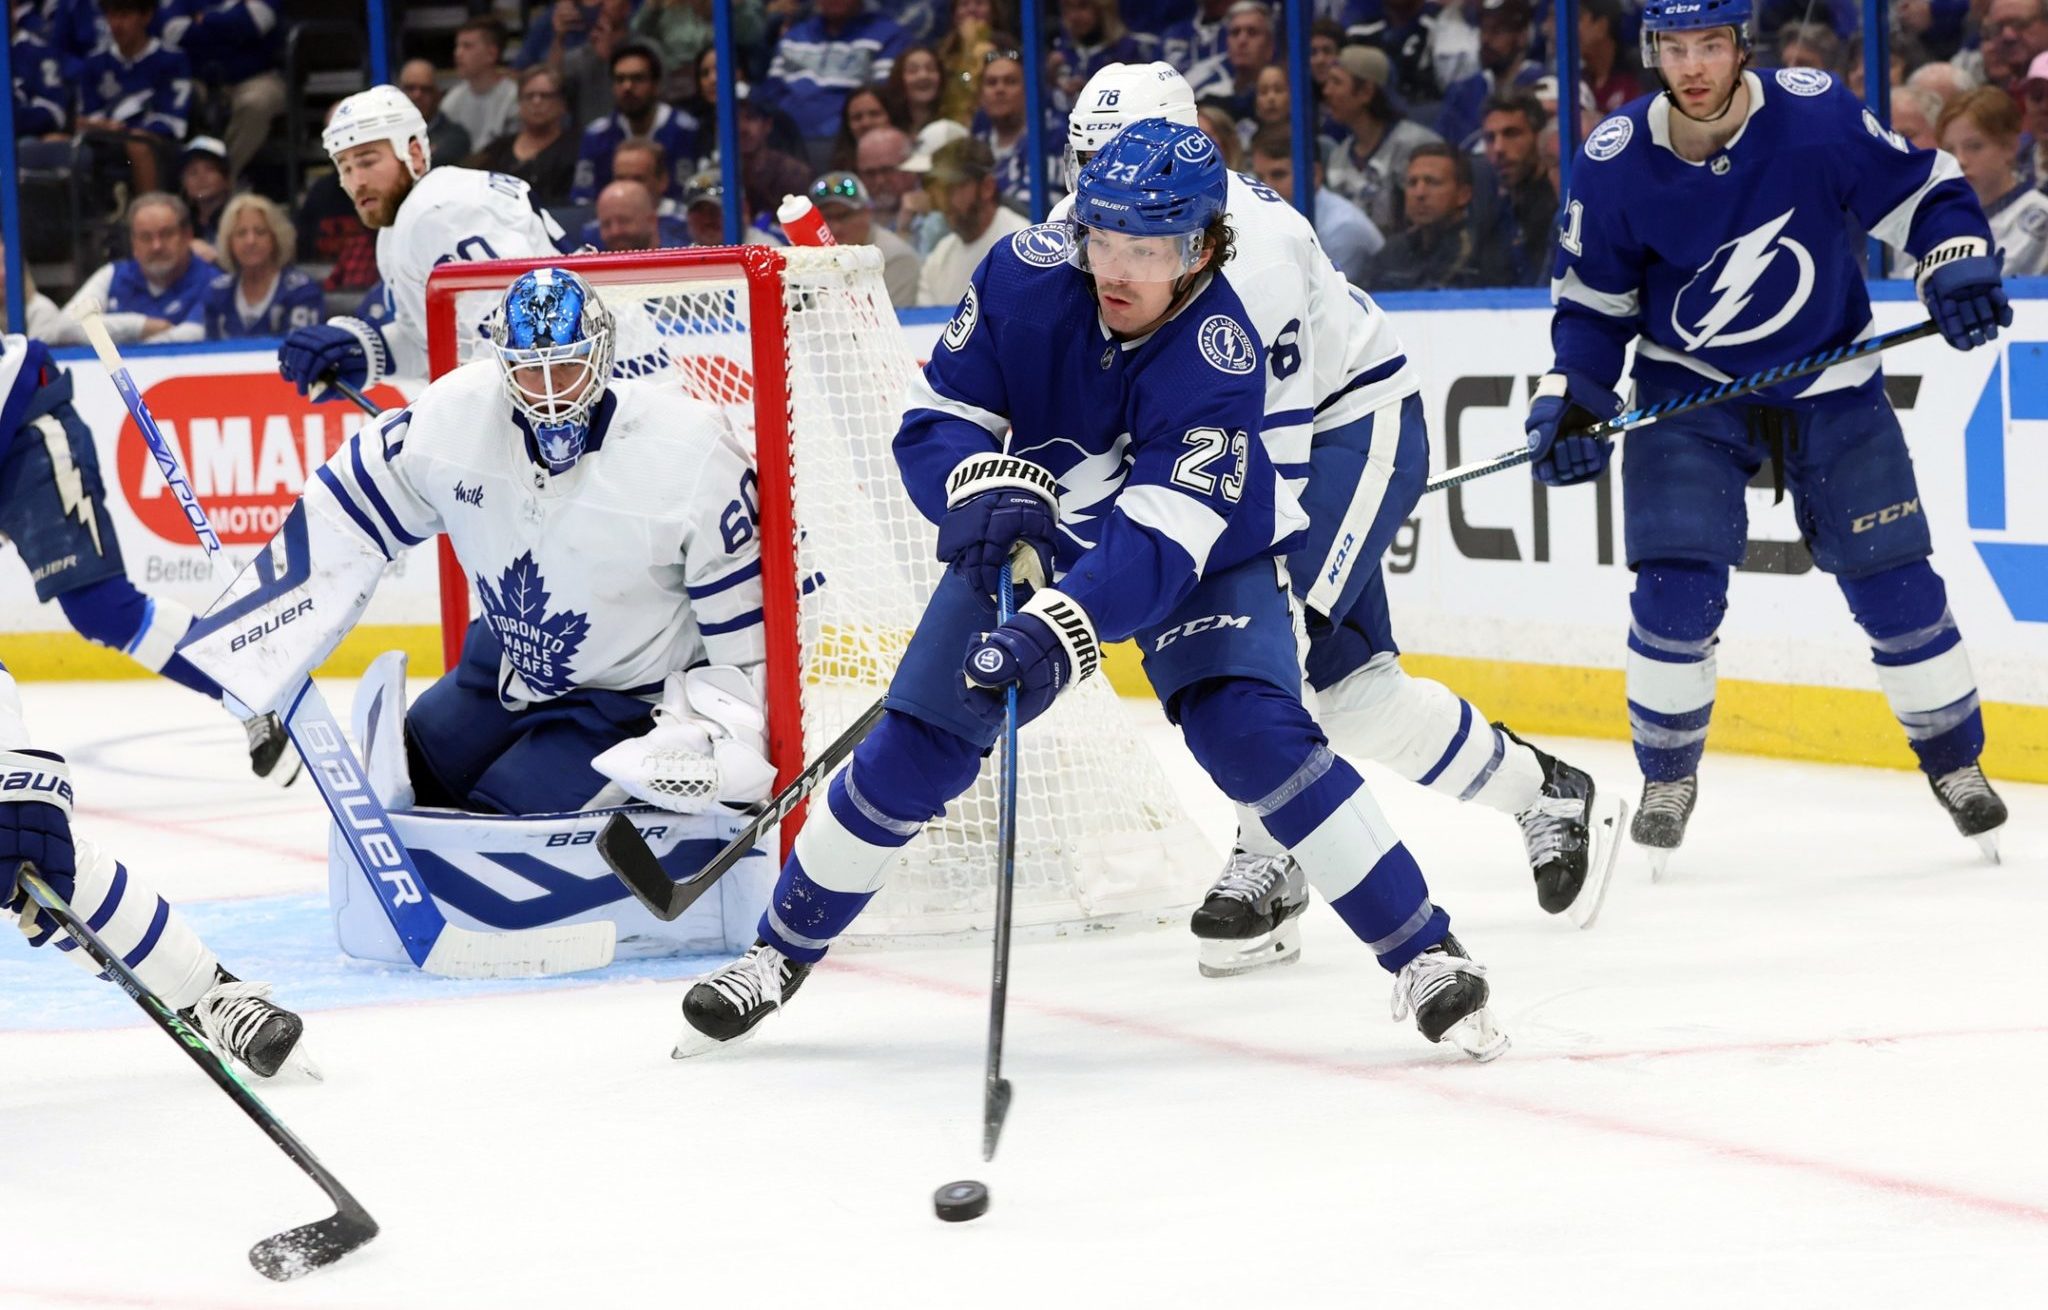 Stamkos has 1st 100-point season, Bolts top Blue Jackets 4-1